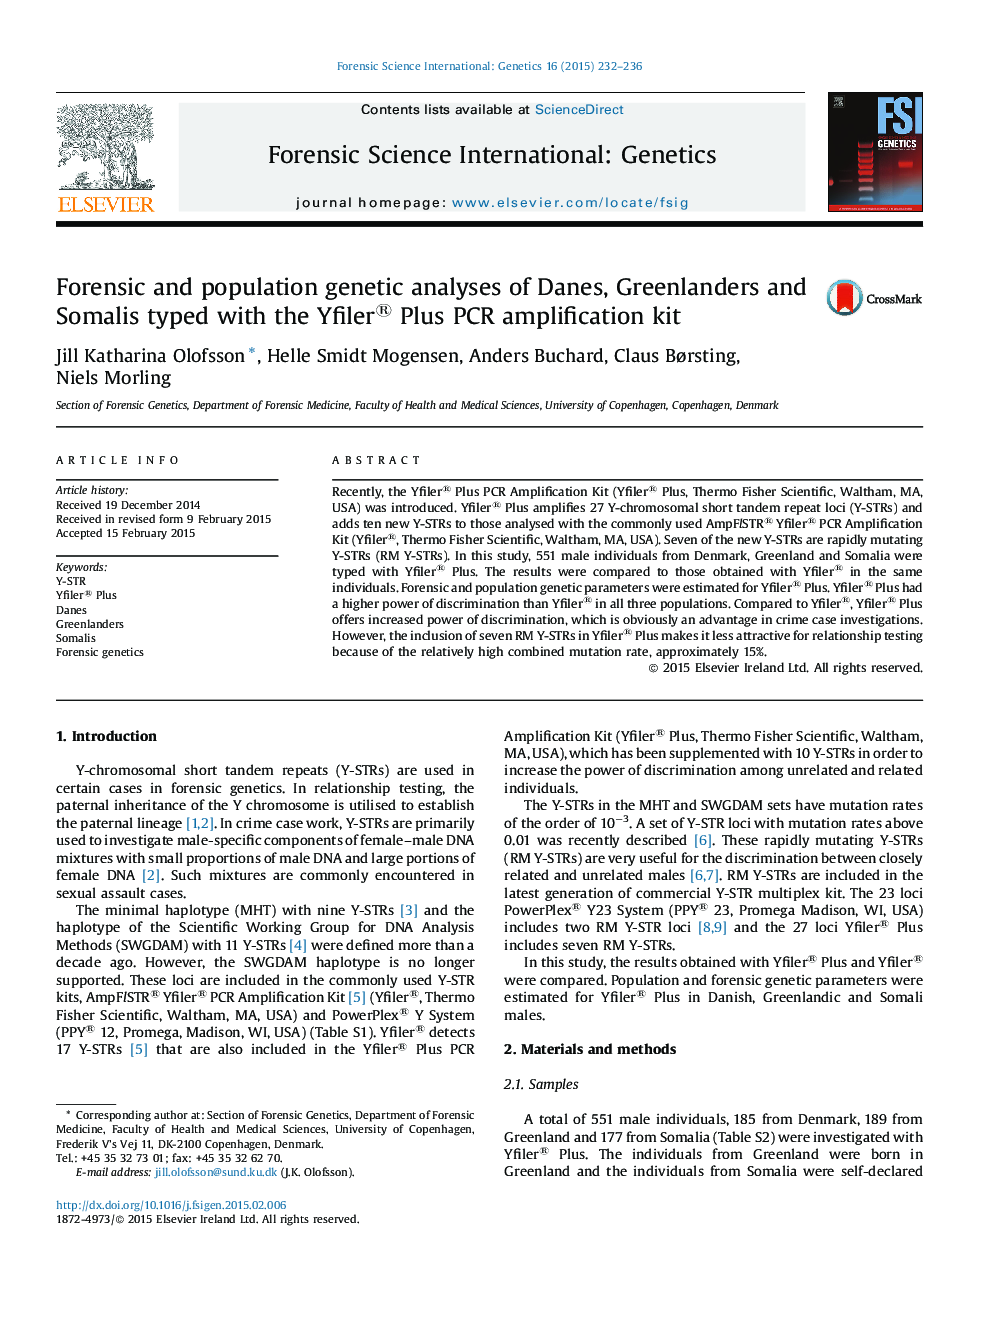 Forensic and population genetic analyses of Danes, Greenlanders and Somalis typed with the Yfiler® Plus PCR amplification kit